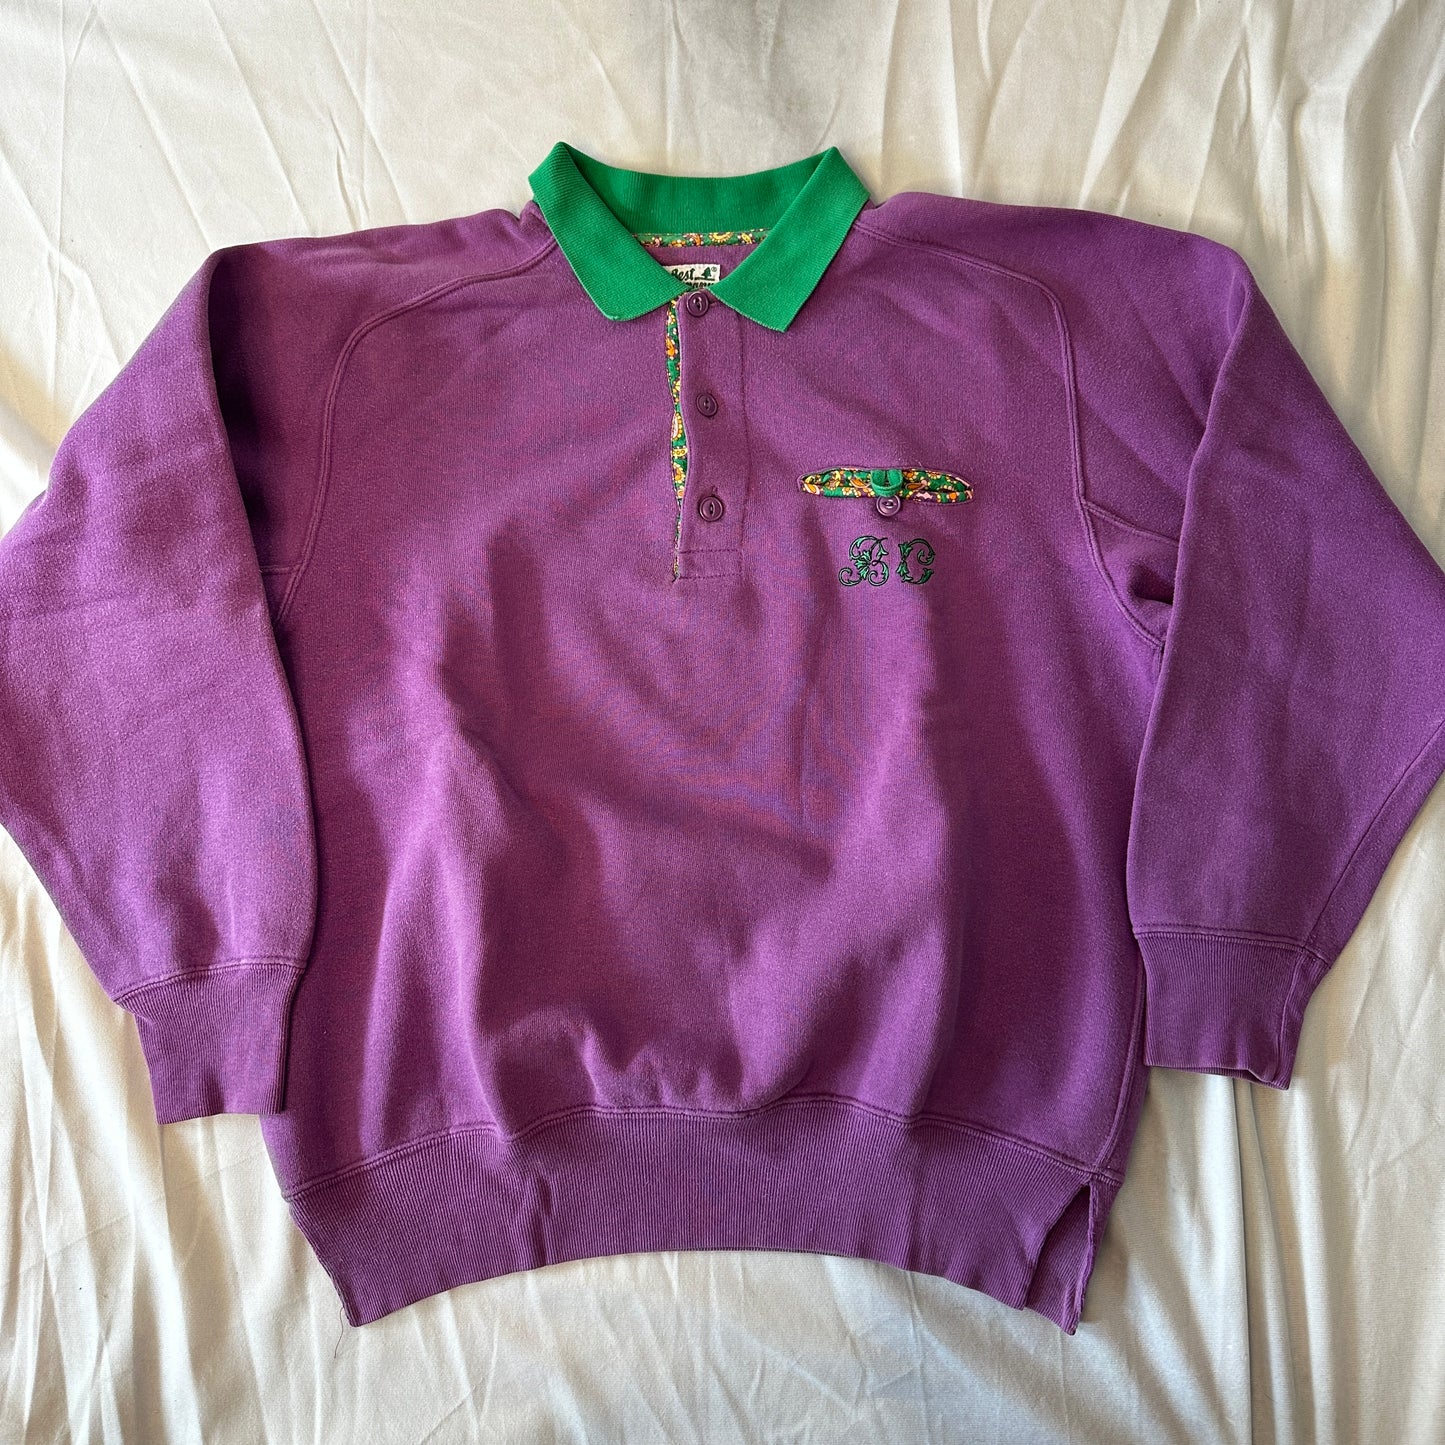 Best Company 80s Vintage "B.C." Polo Sweatshirt- M - Made in Italy